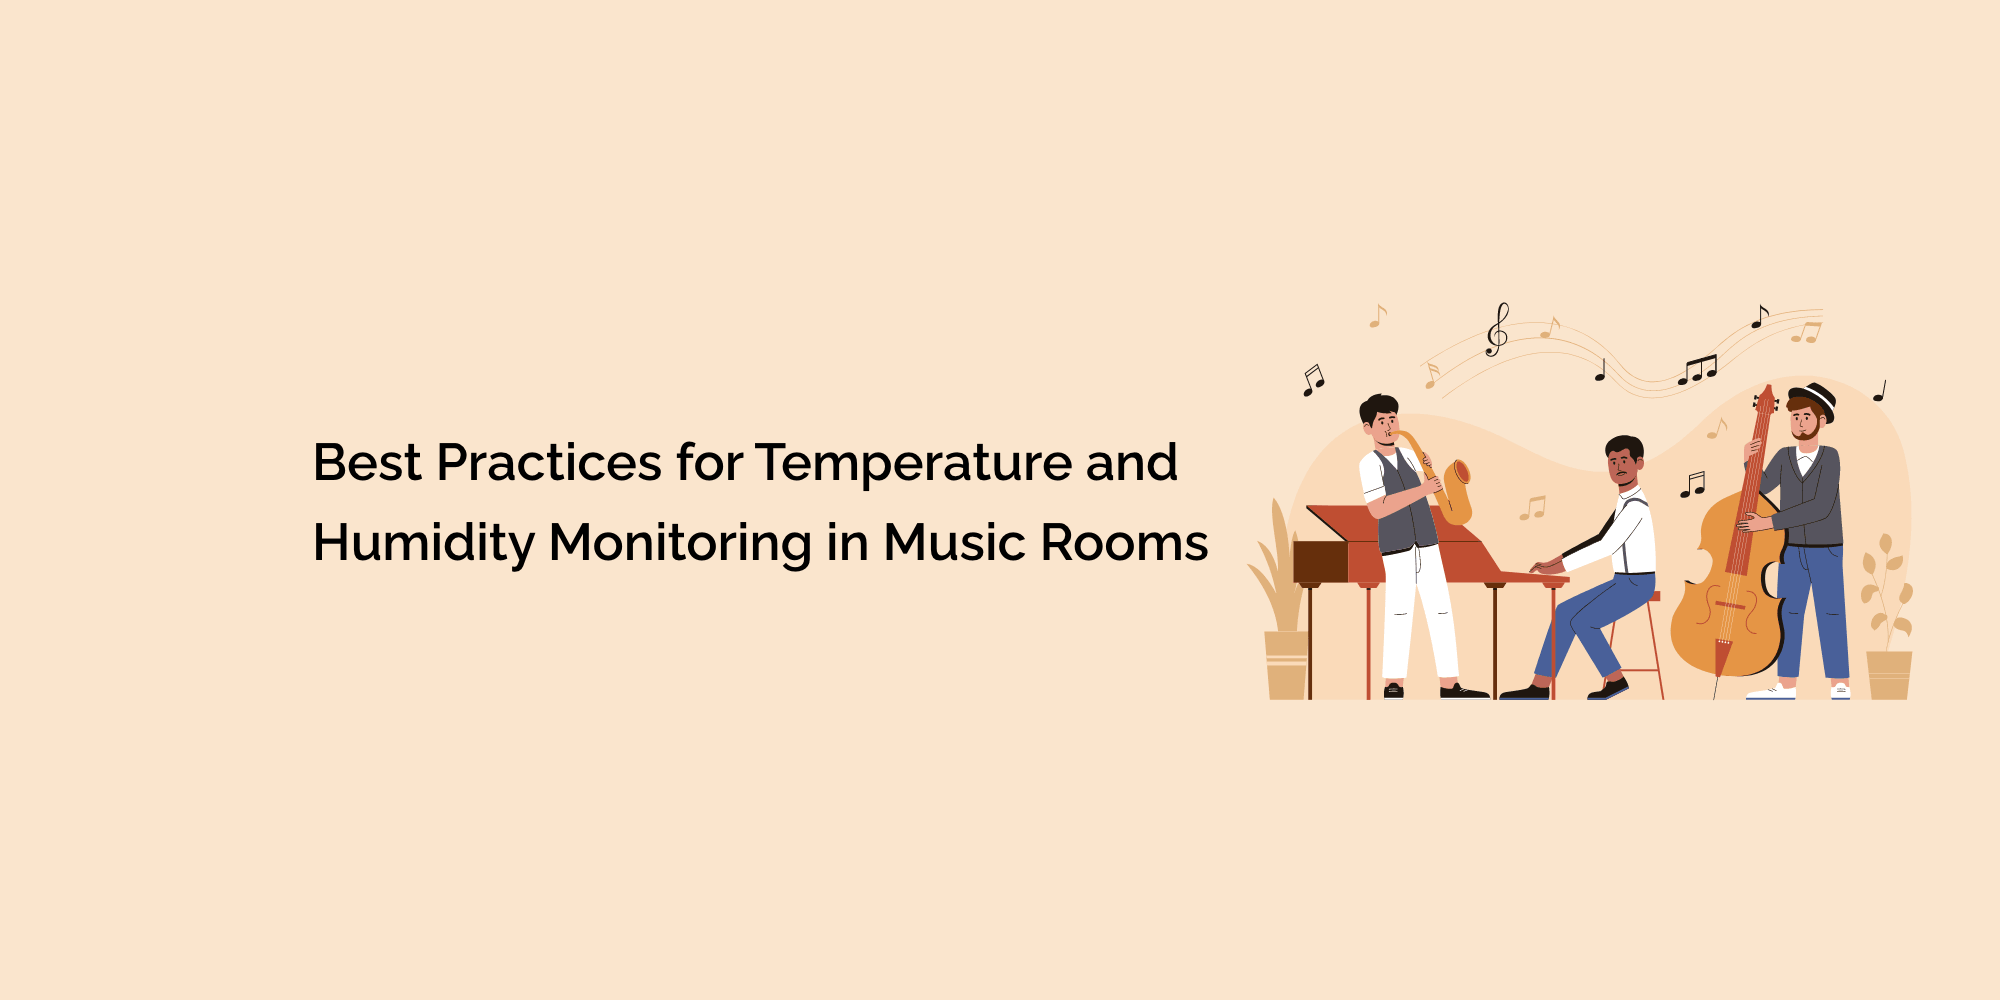 Best Practices for Temperature and Humidity Monitoring in Music Rooms